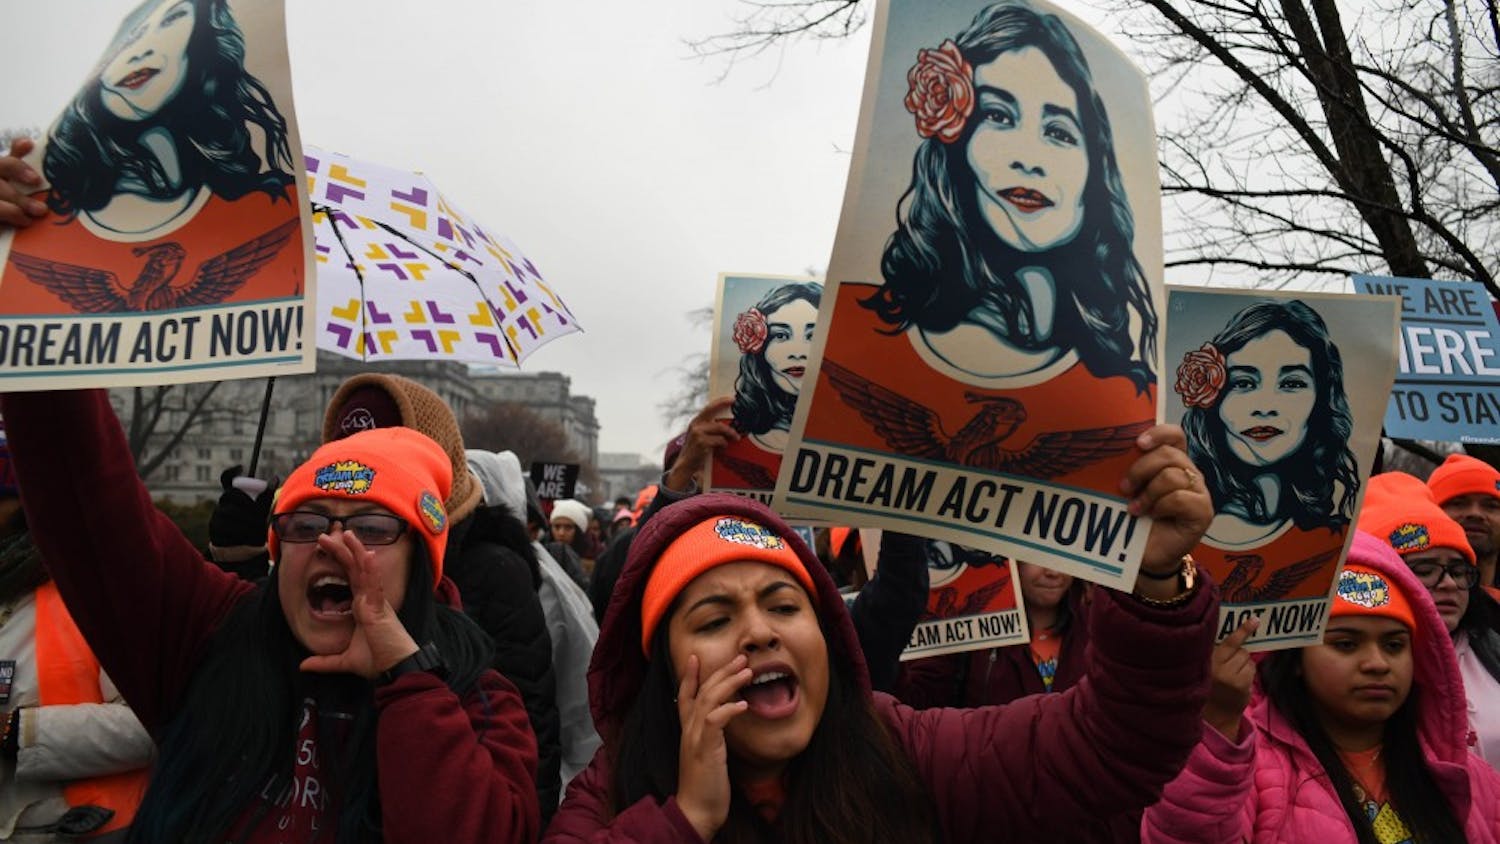 Immigration activists demonstrate outside the Capitol on Wednesday, Feb. 7, 2018 in Washington D.C. as the Senate agreed to a deal to avoid a shutdown that does not include provisions for so-called Dreamers sought by Democrats. (Miguel Juarez Lugo/Zuma Press/TNS)